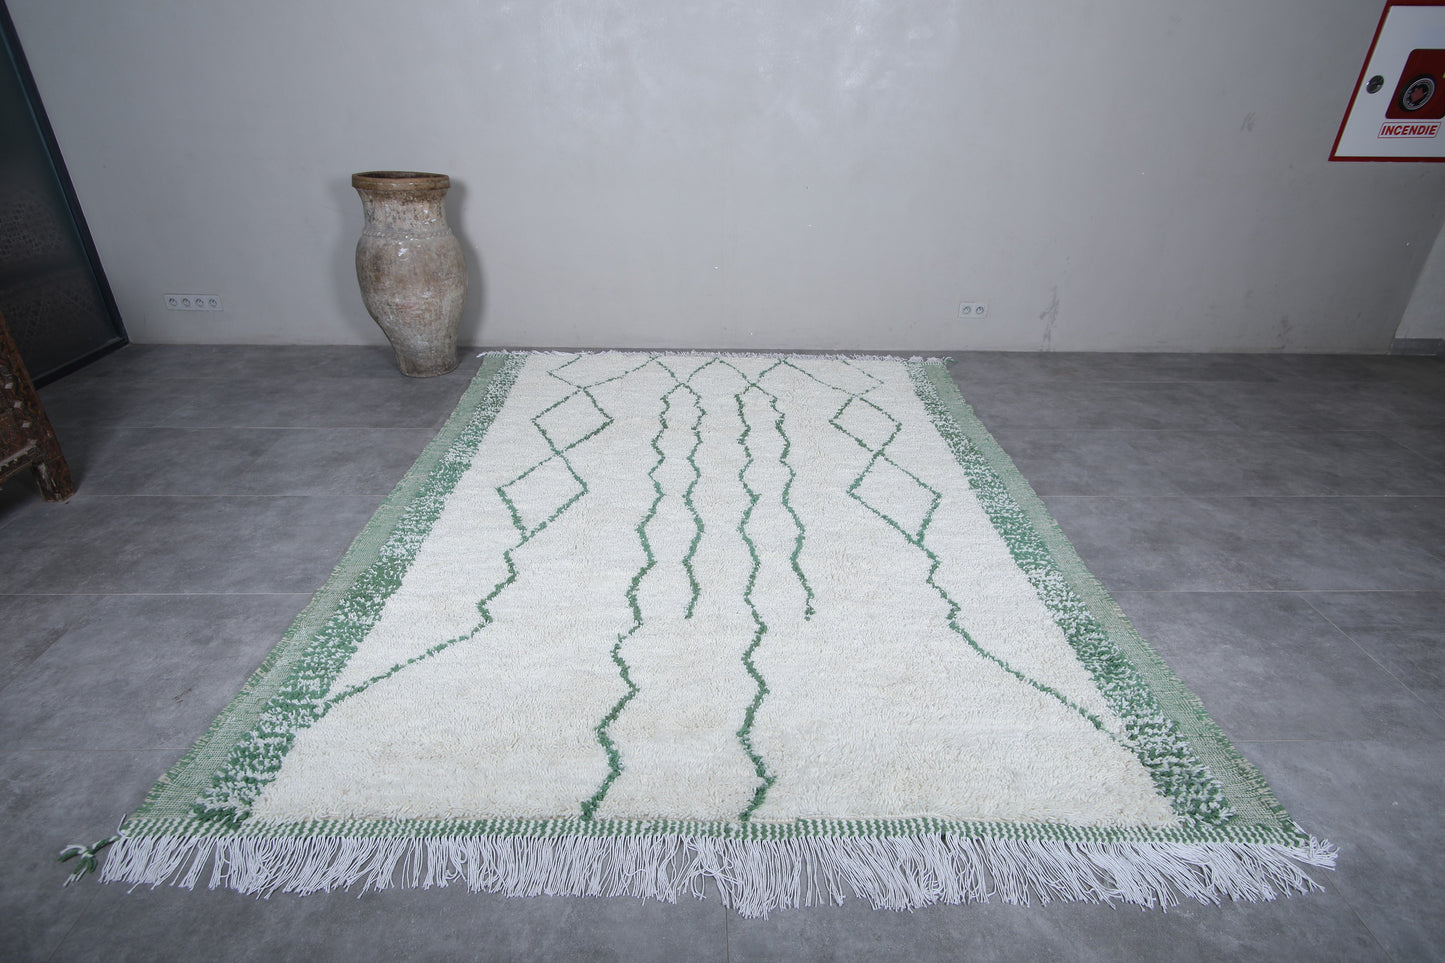 Hand knotted Rug - Beni ourain rug - Moroccan area rug - Custom size rug